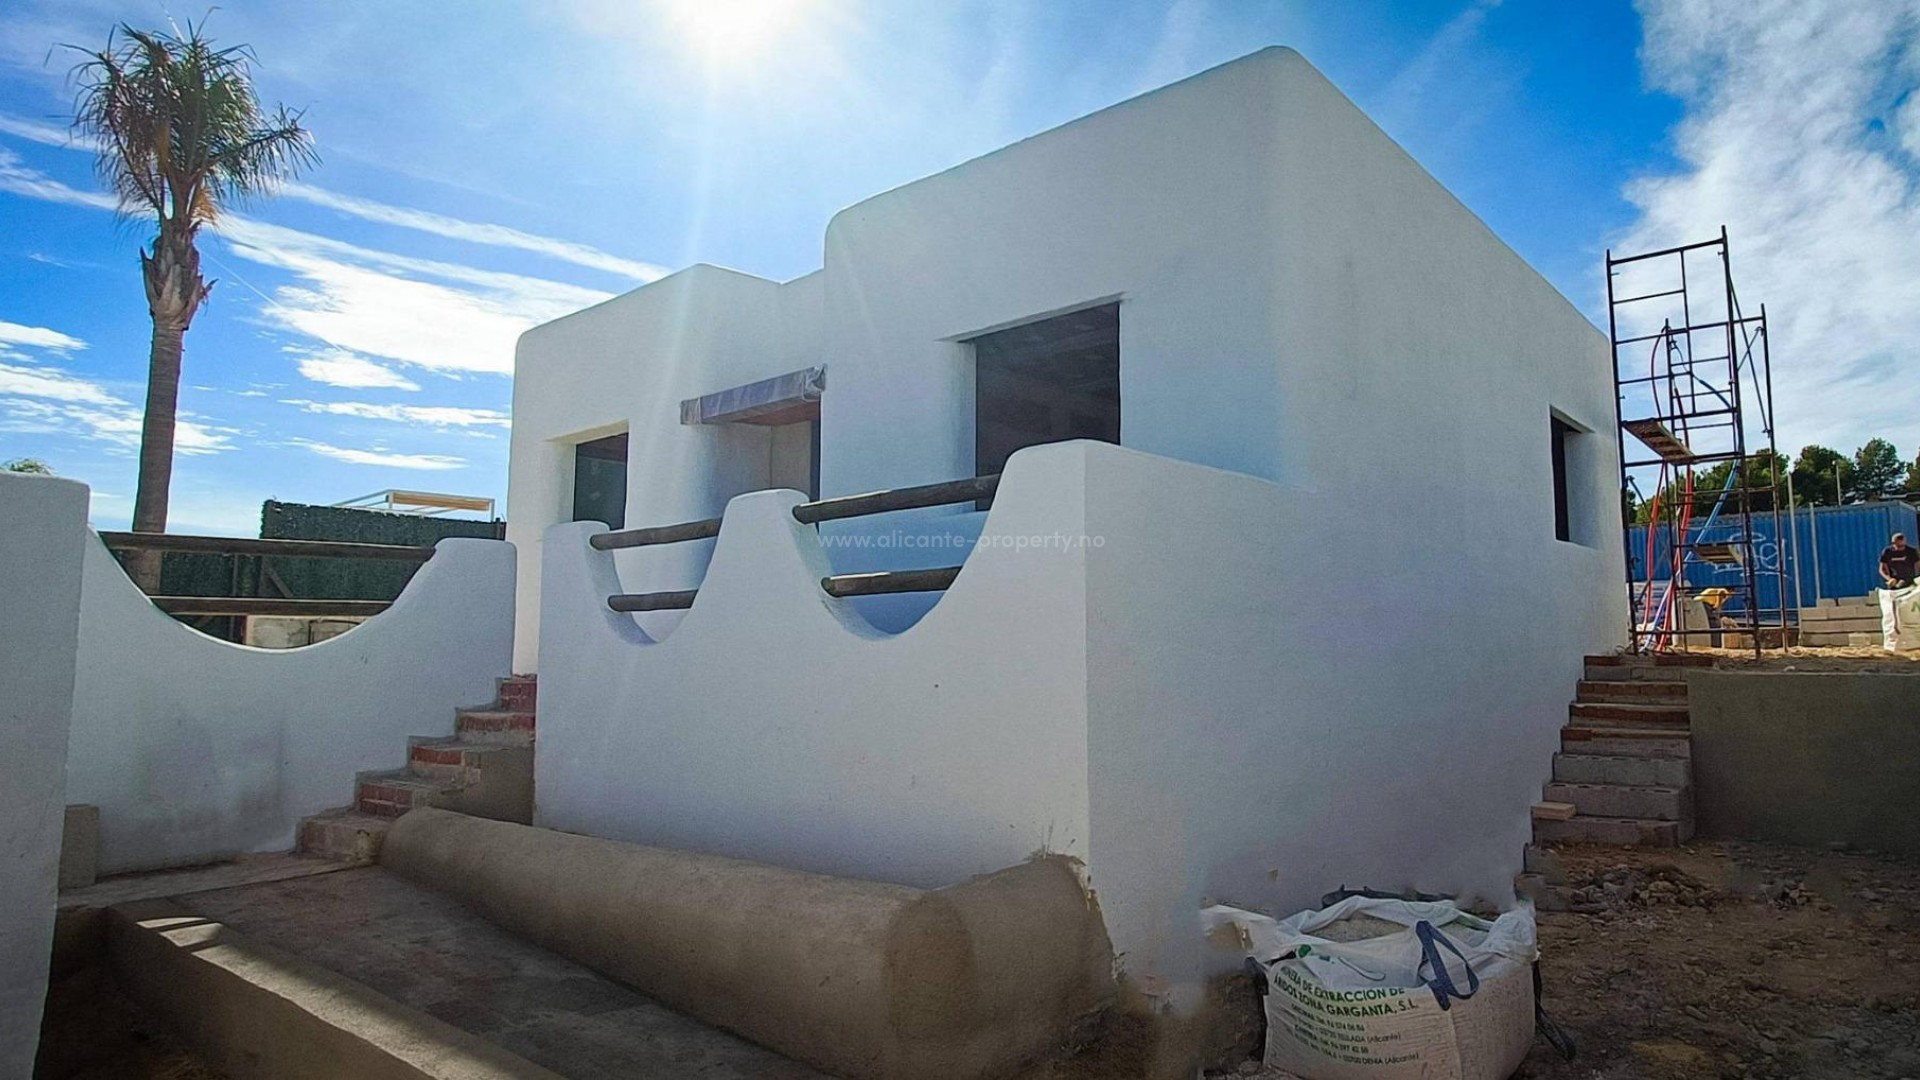 New exclusive villa in Polop in Ibiza style, amazing mountain and sea views, one floor with 2 bedrooms and 1 bathroom, pool, large solarium